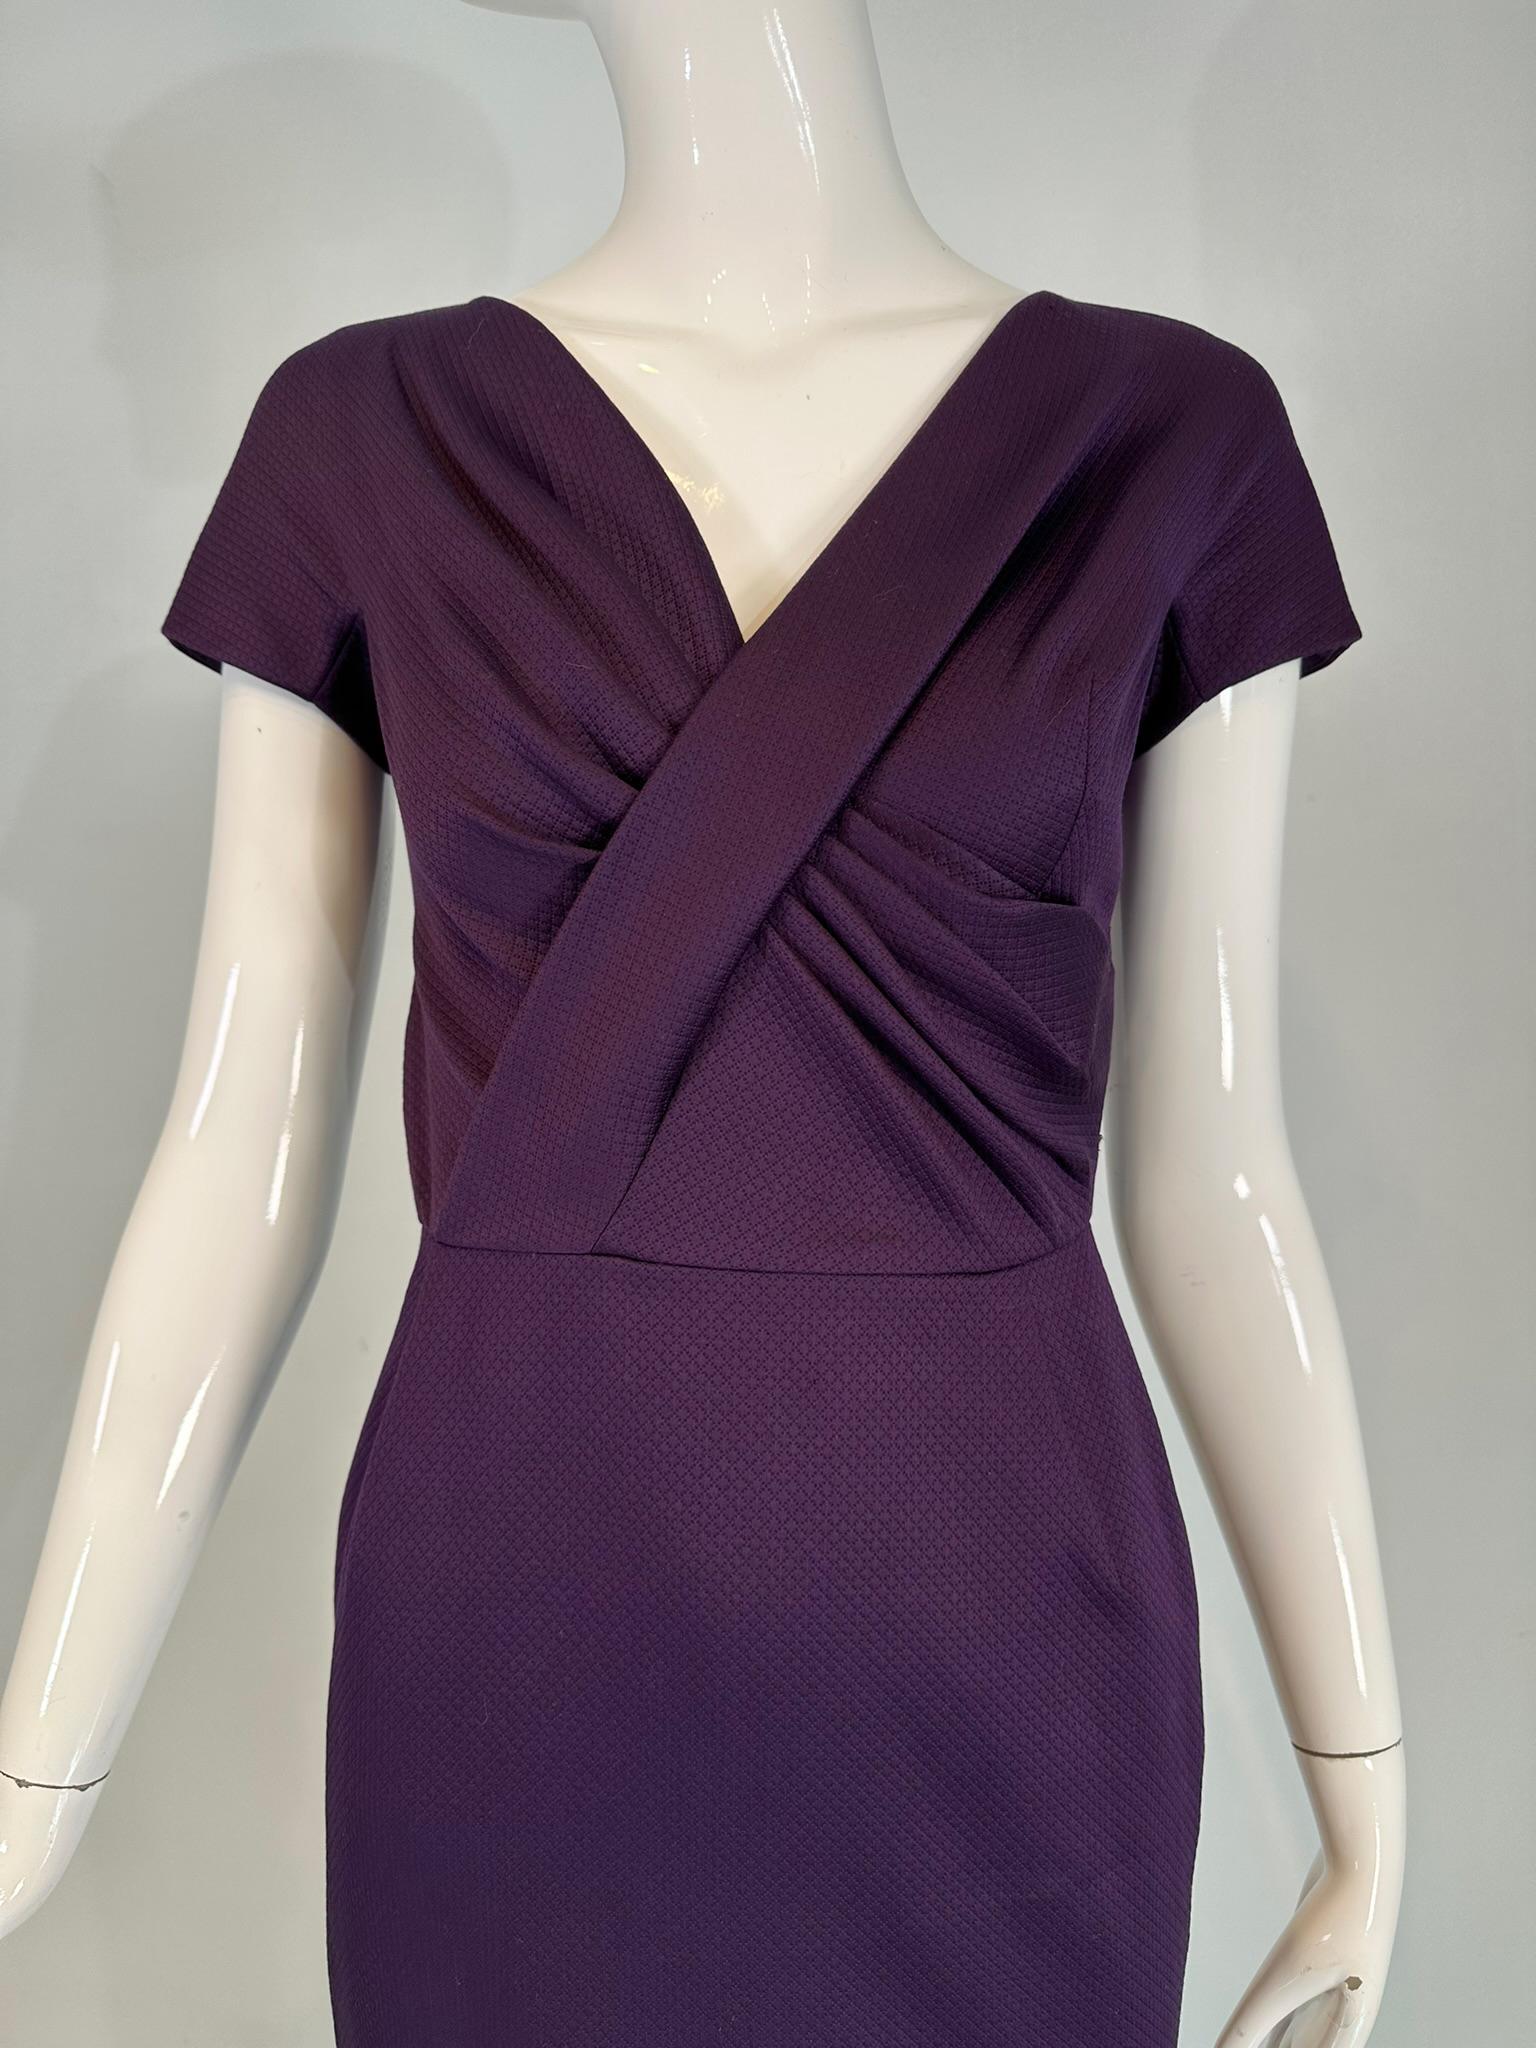 Christian Dior Paris aubergine V neck pleat draped bodice sheath dress. Aubergine silk dobby weave fabric, the bodice features a v wrap neckline with pleats and cap sleeves. A seamed waist and a pencil slim skirt with a center hem back vent makes